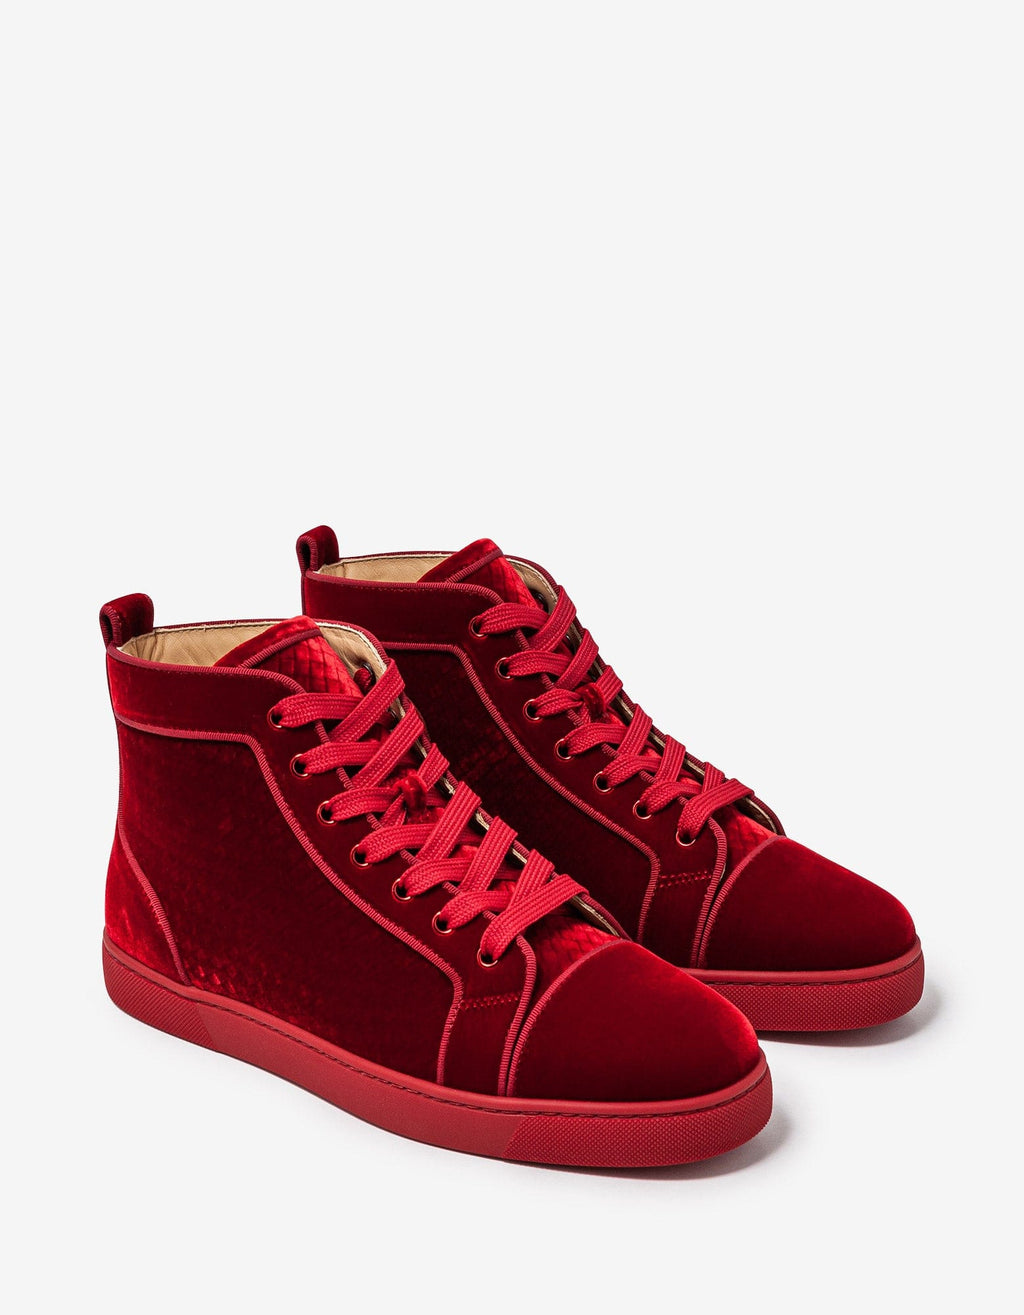 Christian Louboutin Christian Louboutin Louis Orlato Red Velvet High Top Trainers